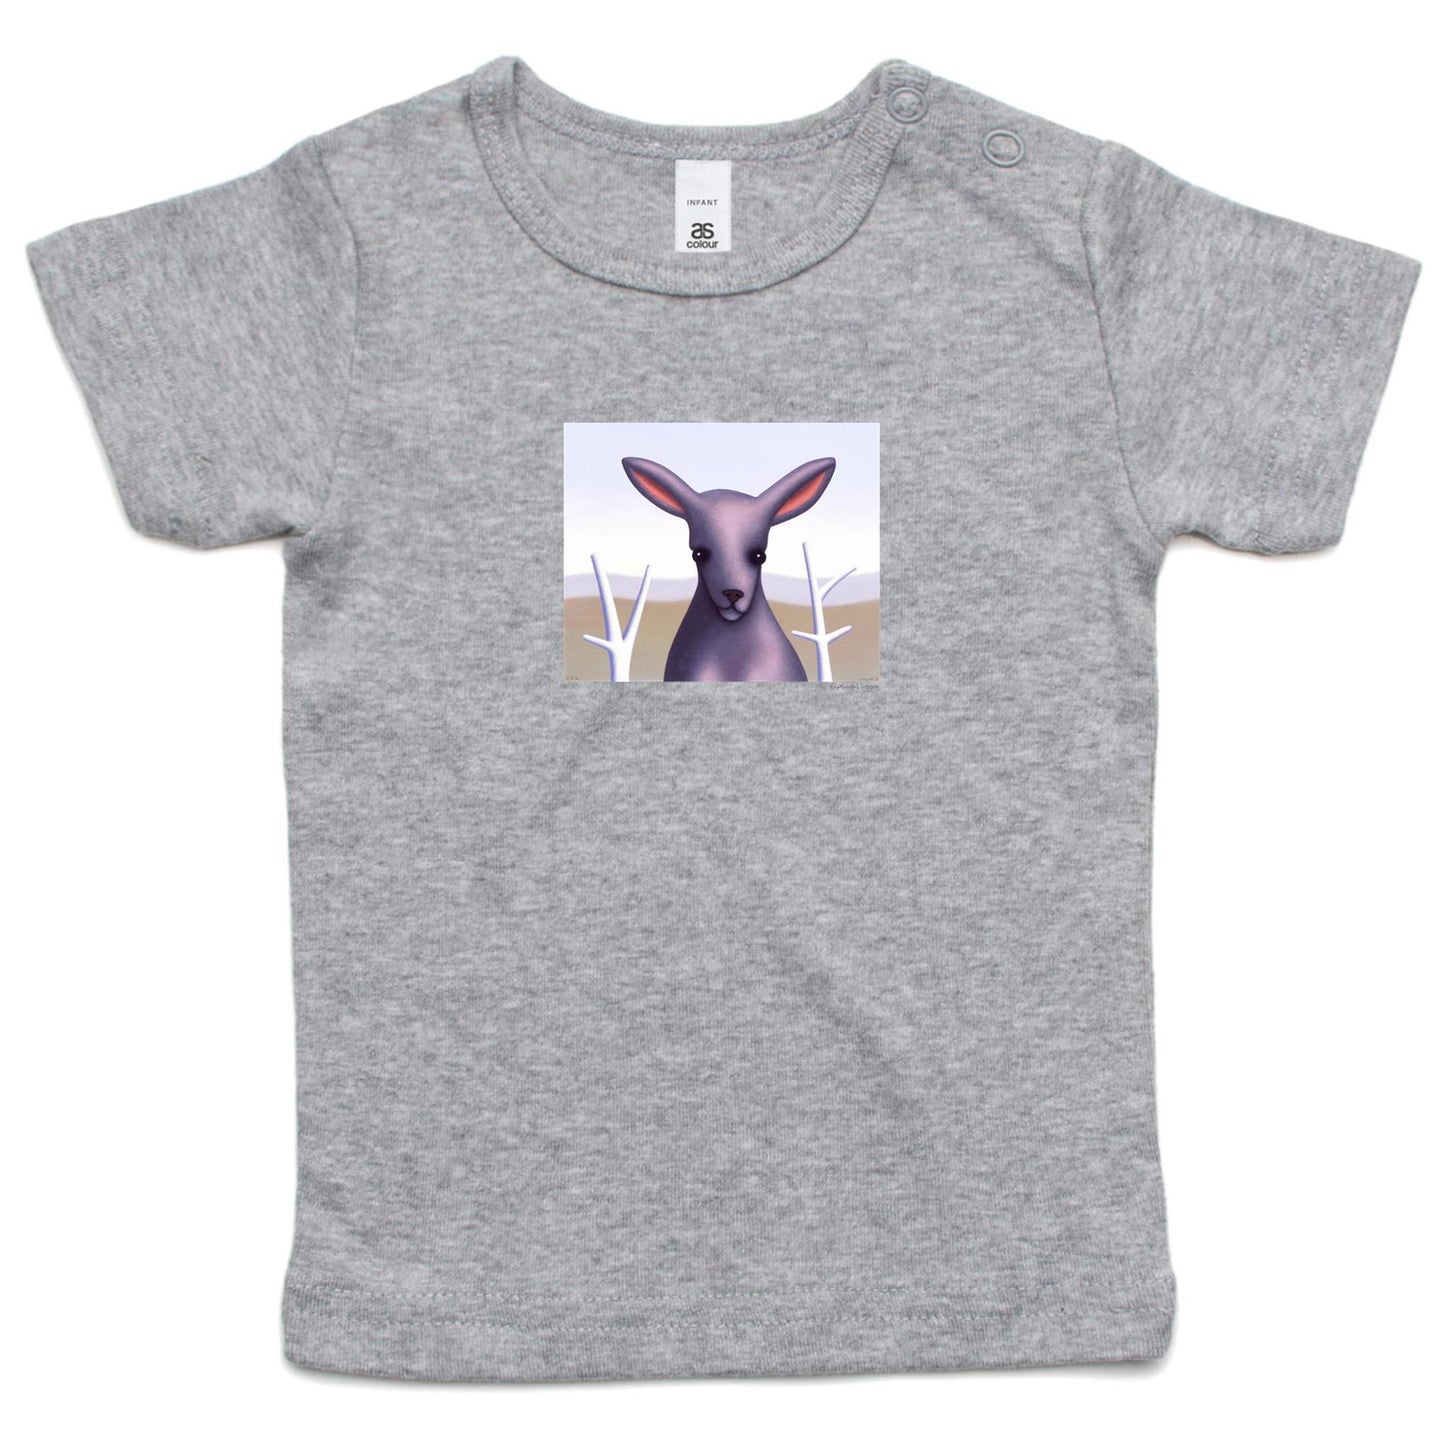 Fluffy the Slightly Pink Kangaroo T Shirts for Babies